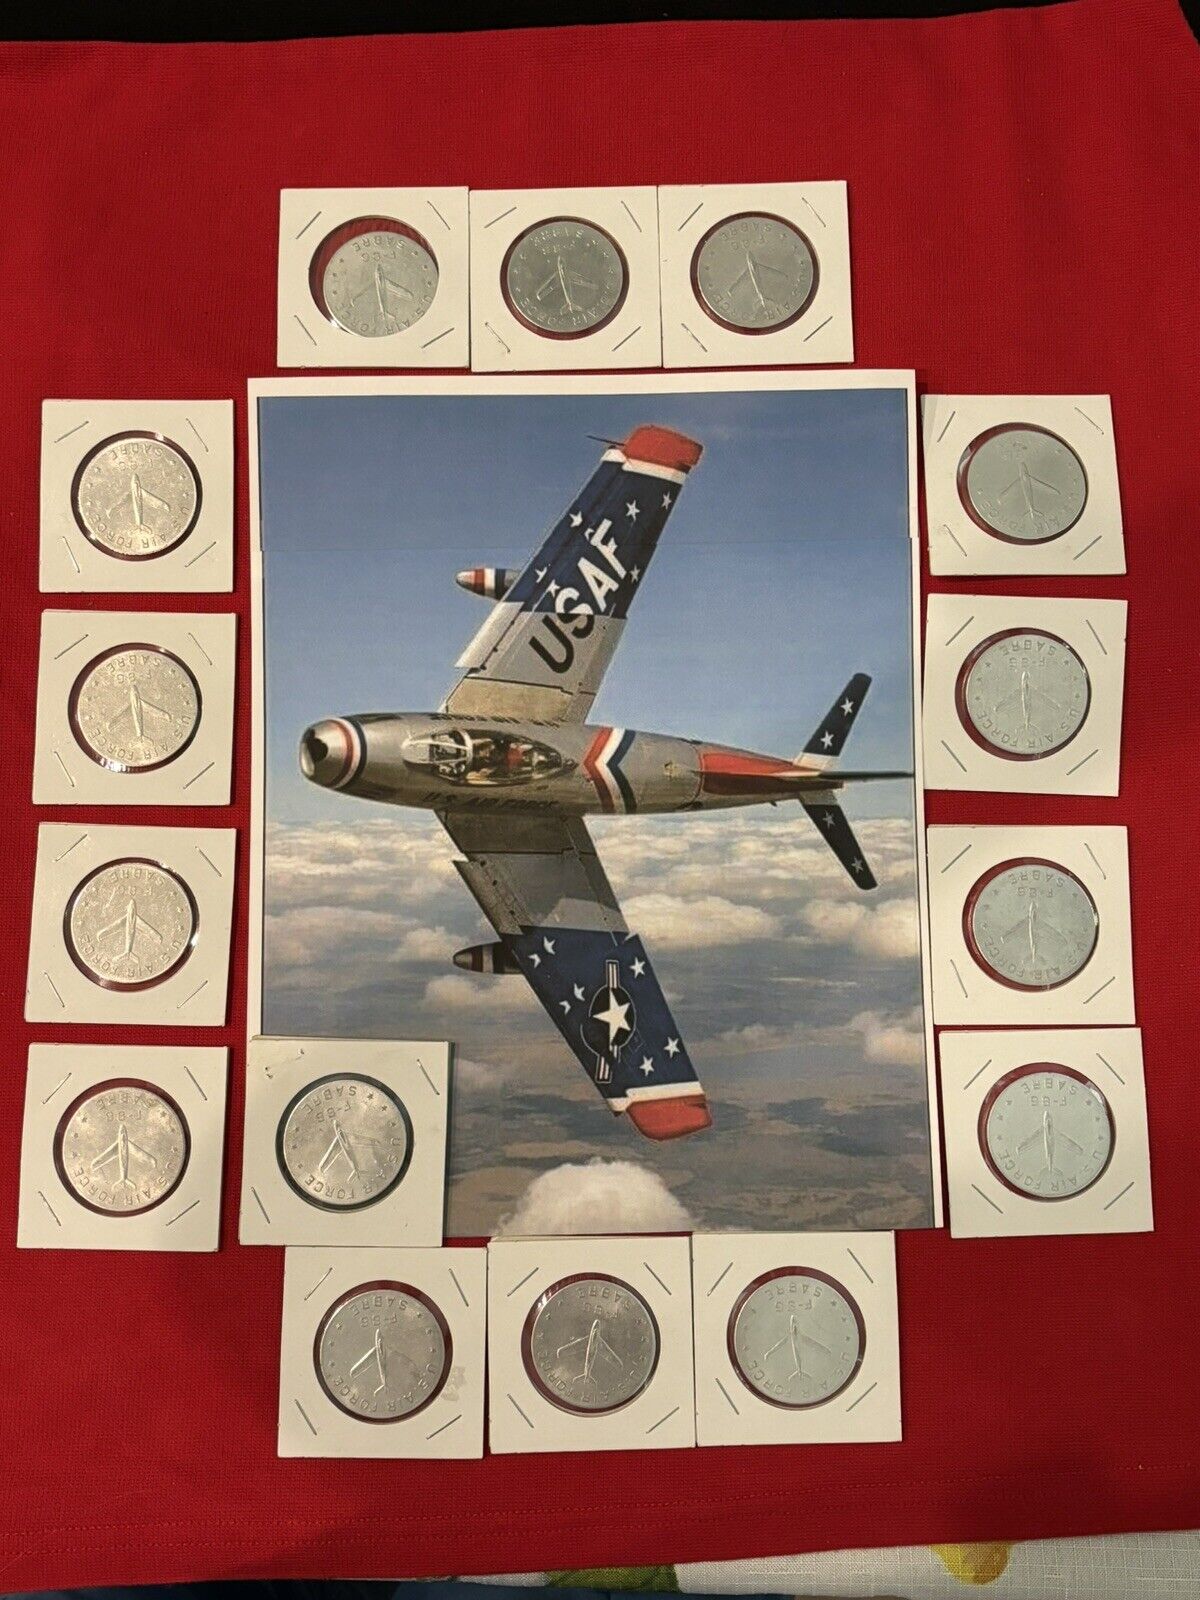 F-86 NORTH AMERICAN SABRE JET (15) TOKENS EXCELLENT CONDITION (1950’S)